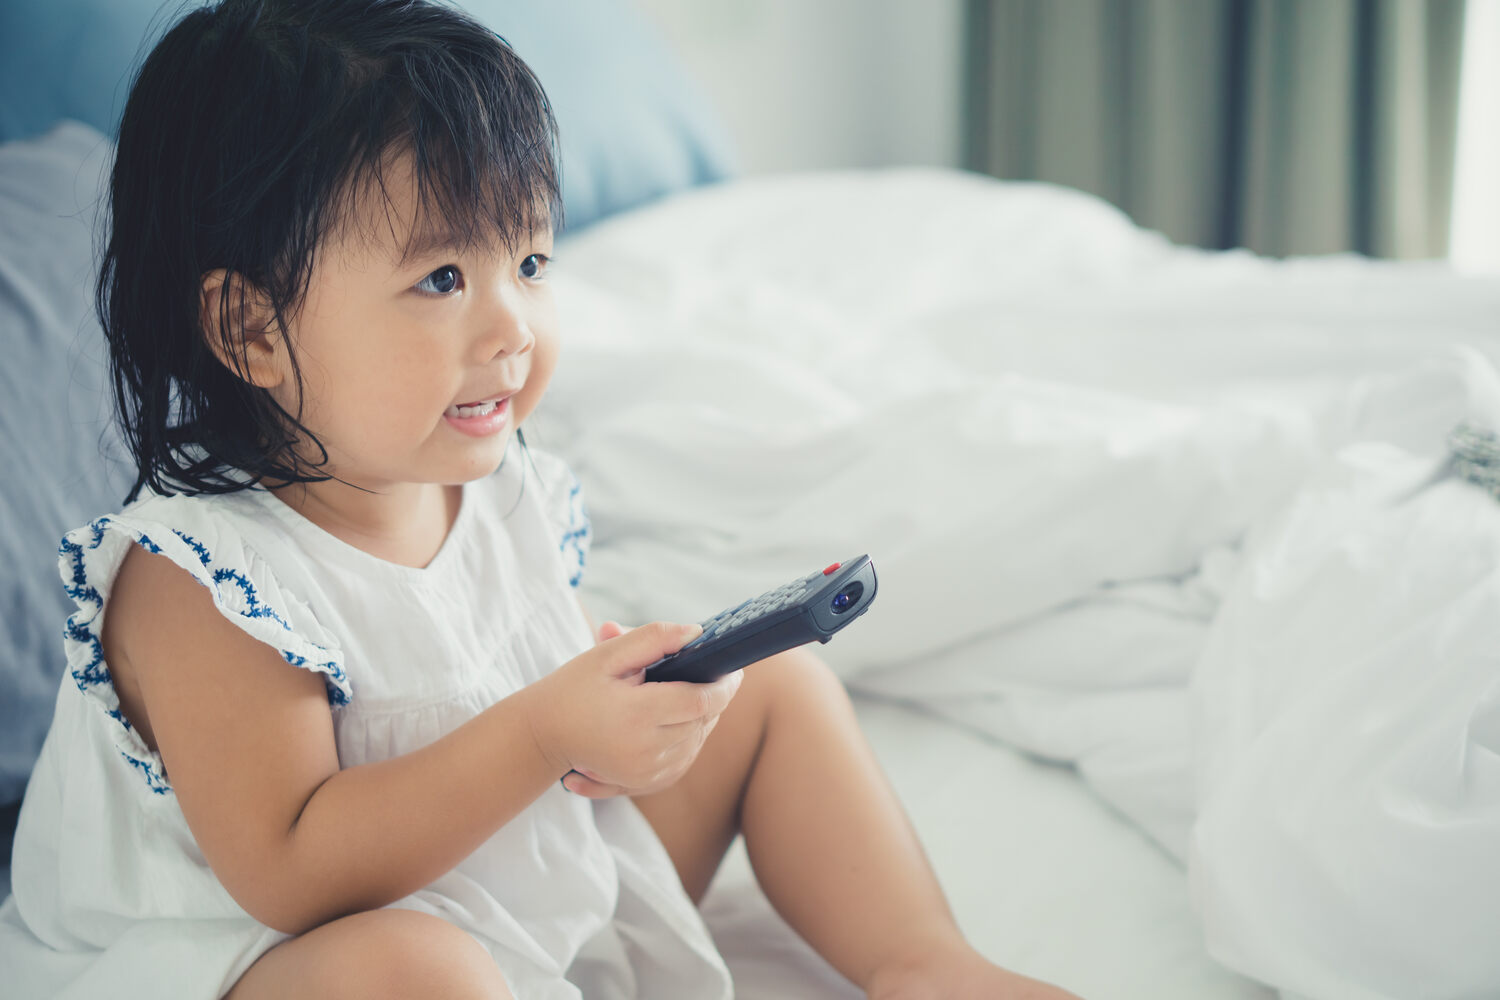 A toddler girl operating TV remote